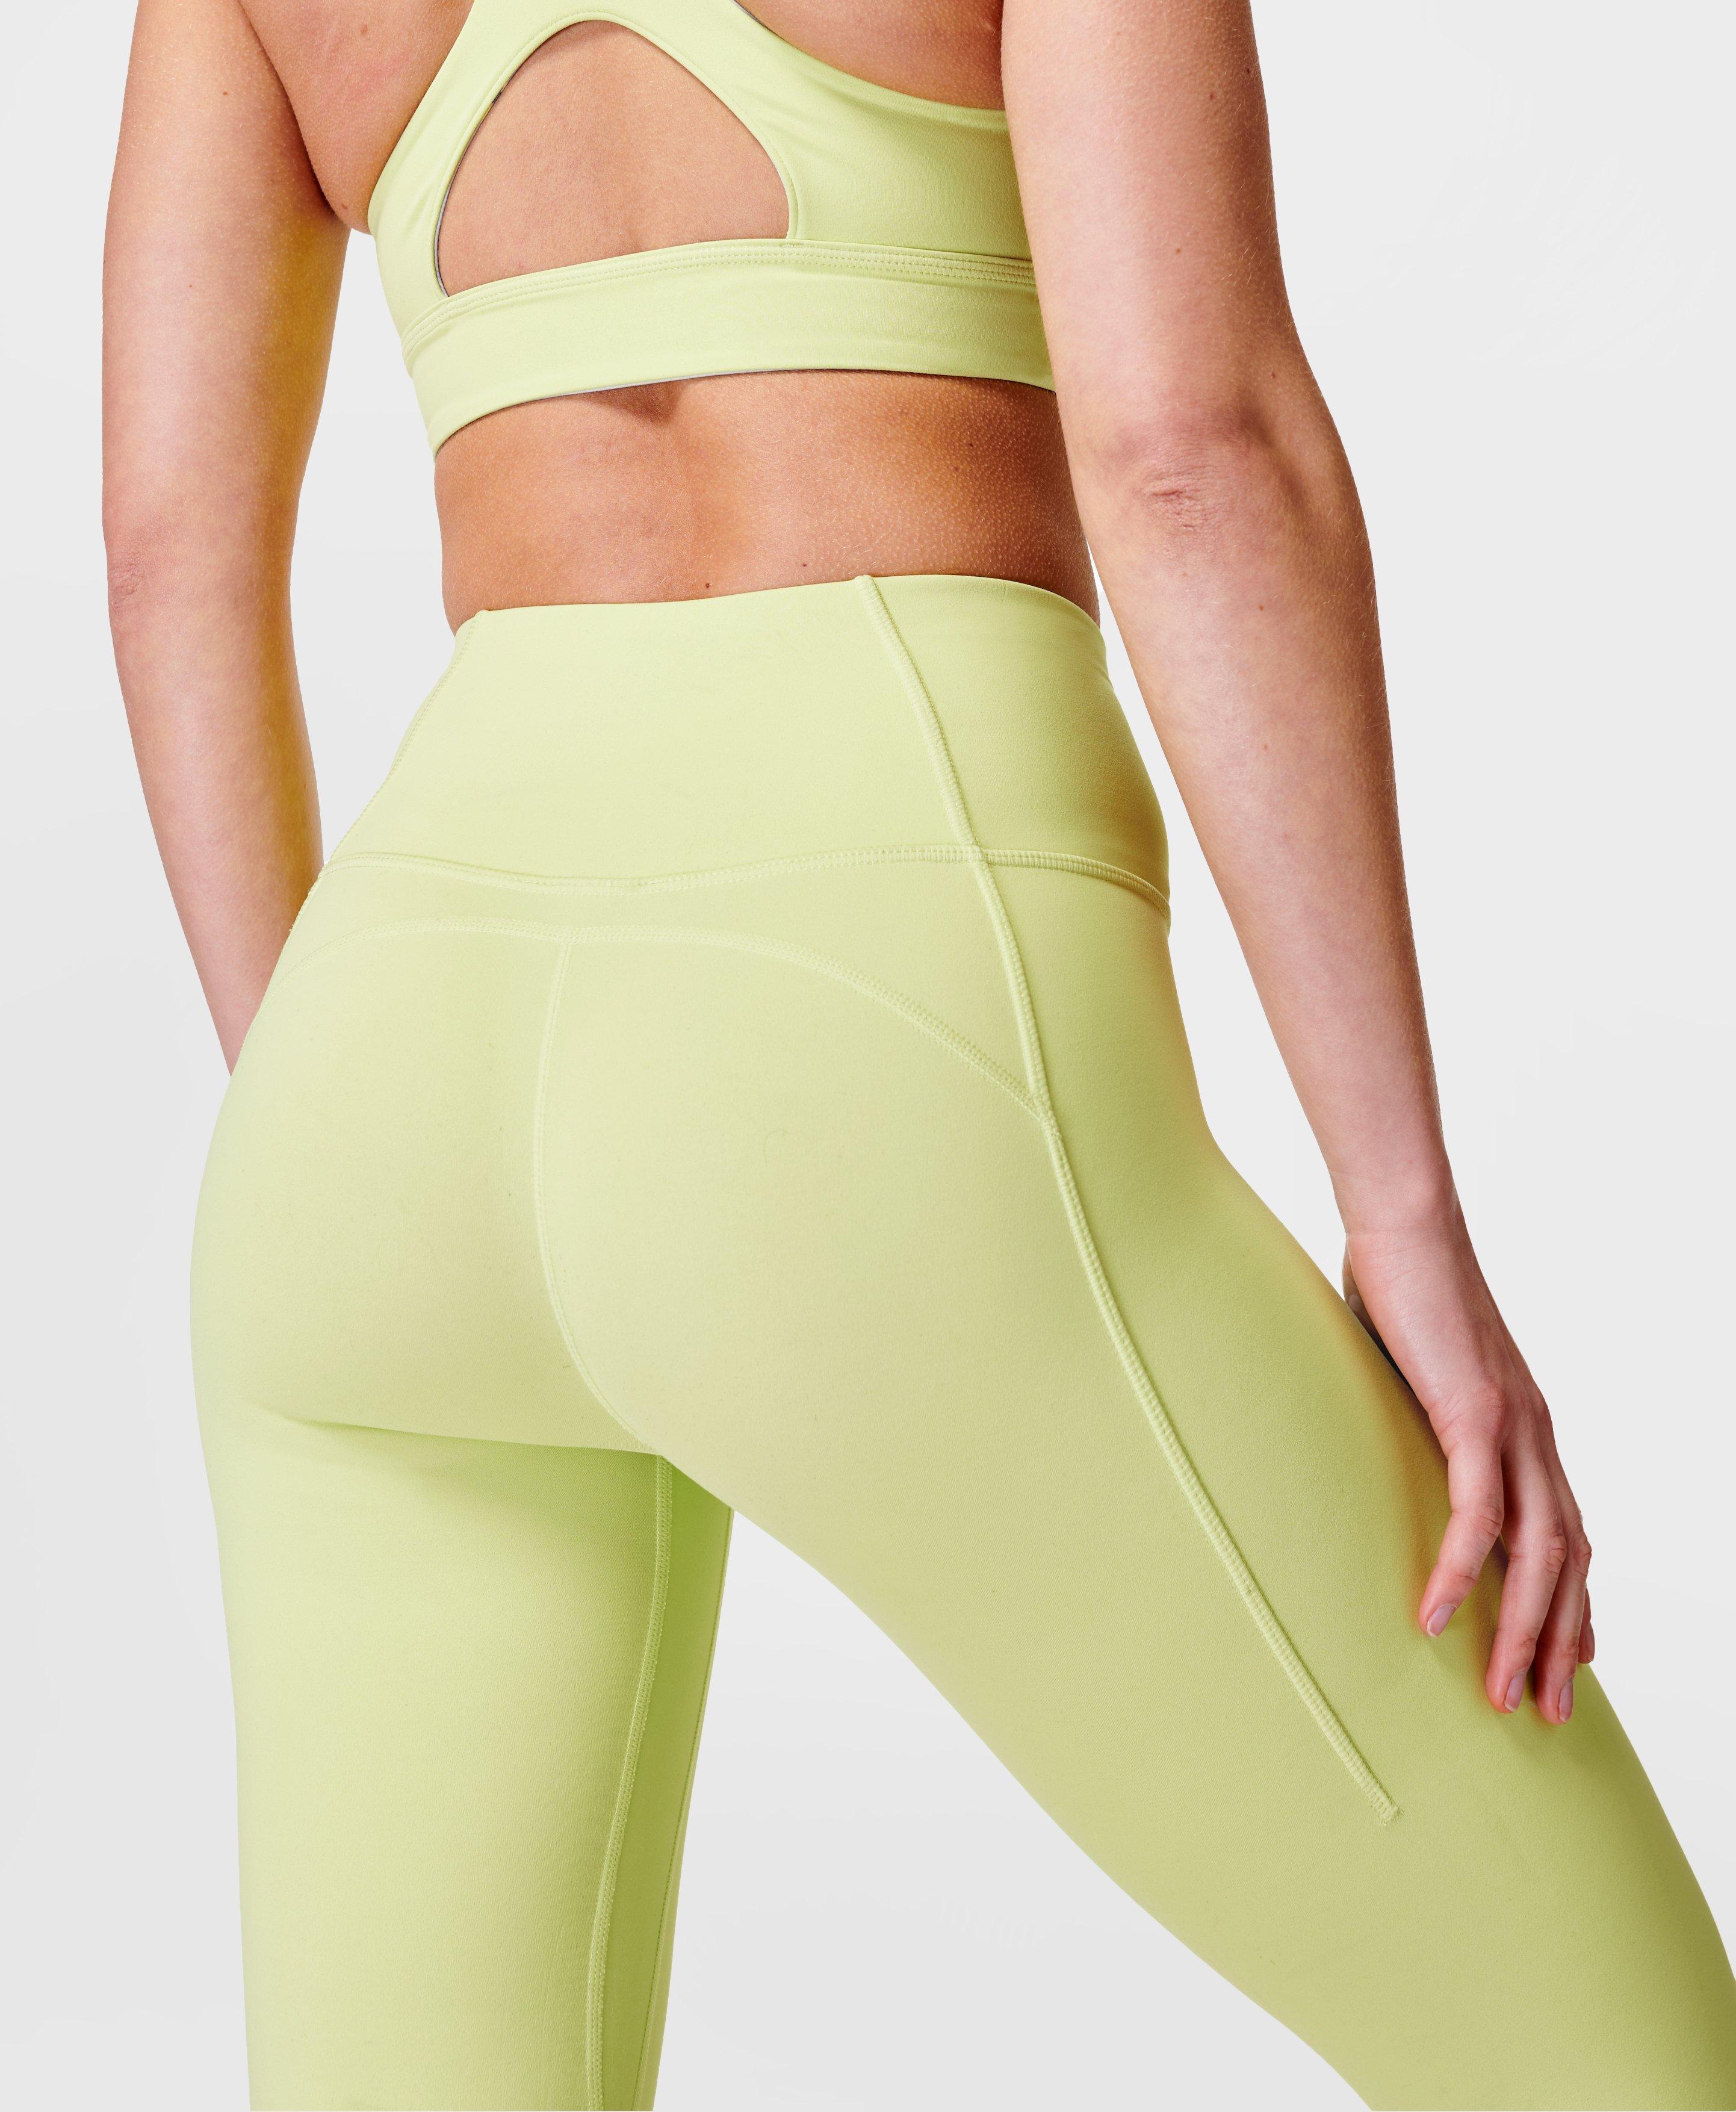 Super Green Fluo – Green Fluo Tights